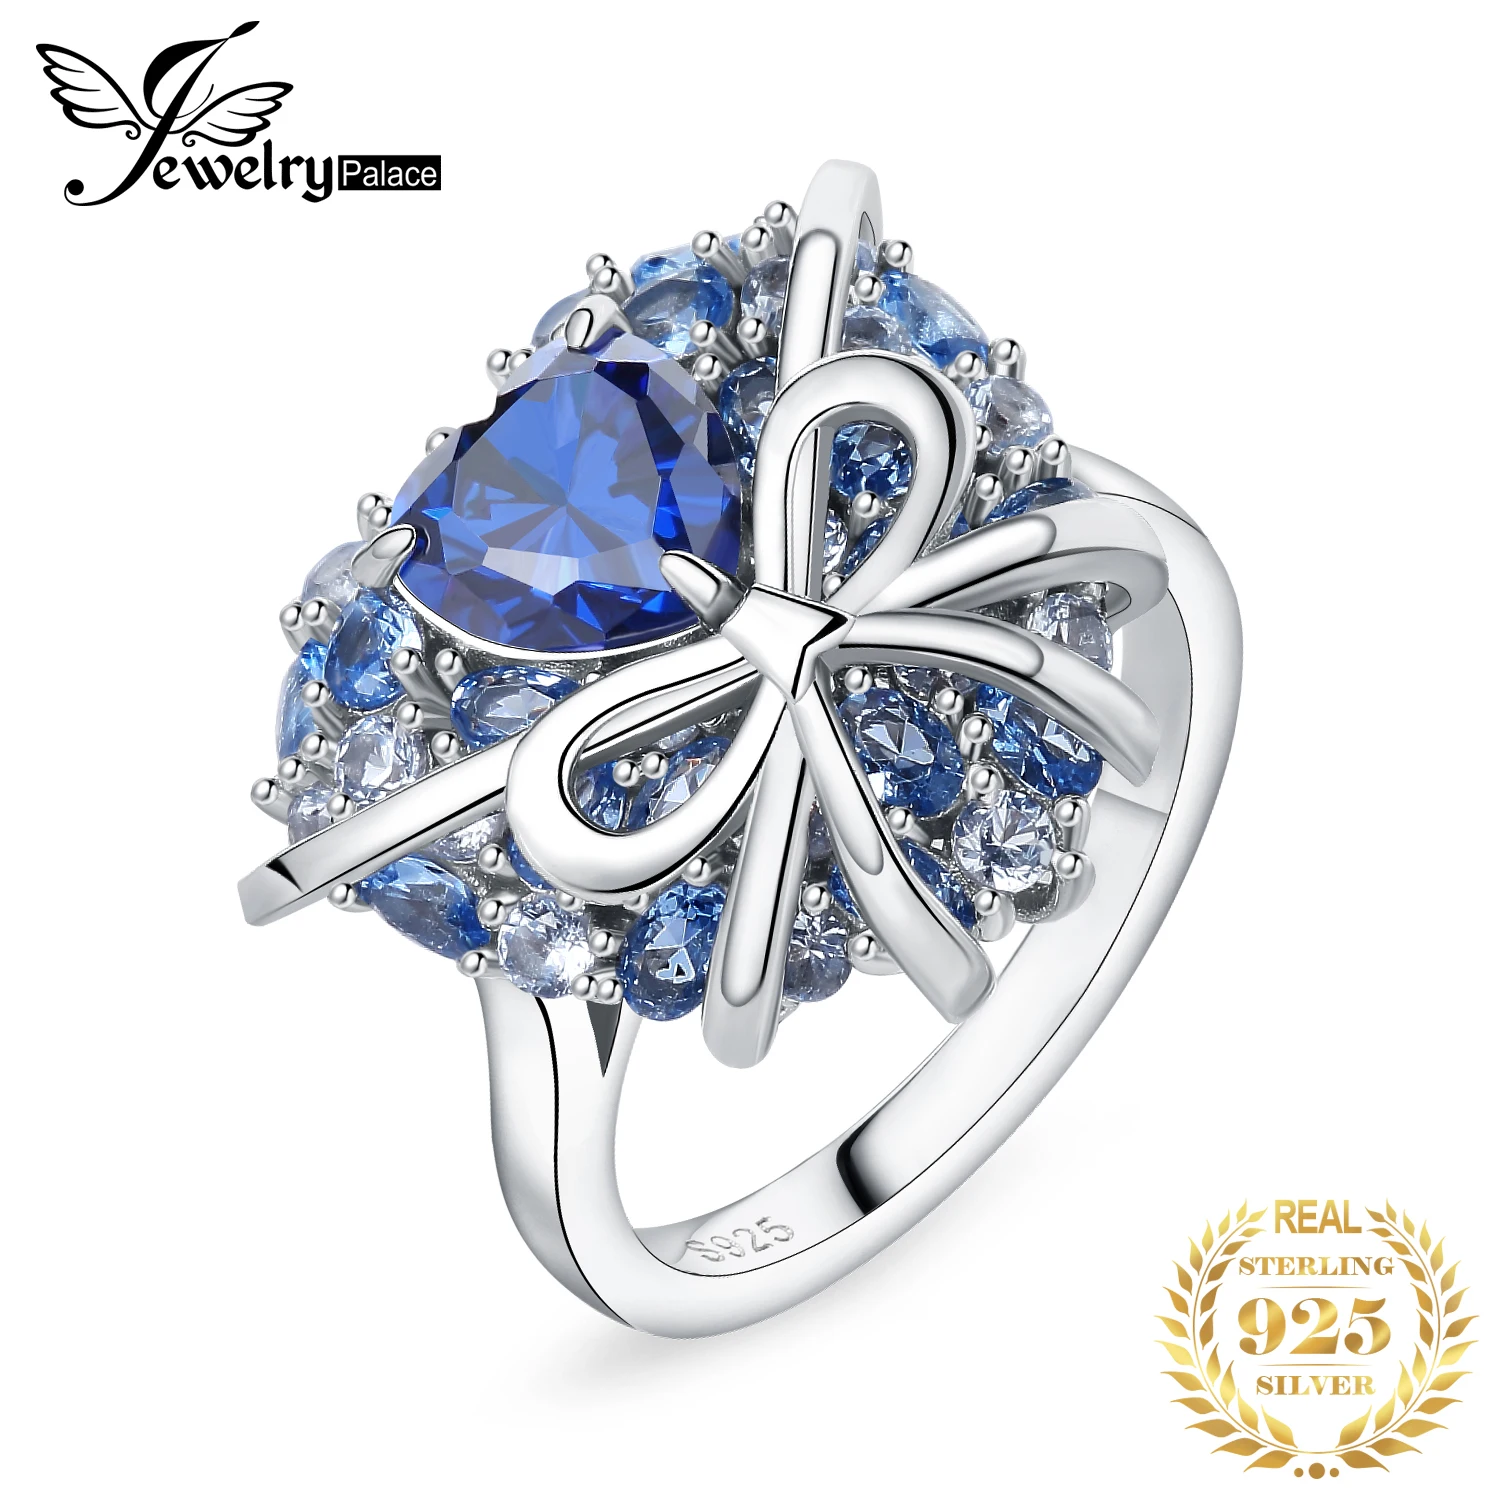 

JewelryPalace New Arrival Heart Bow Love 5ct Blue Gemstone Created Blue Spinel 925 Sterling Silver Cocktail Ring for Woman Girl